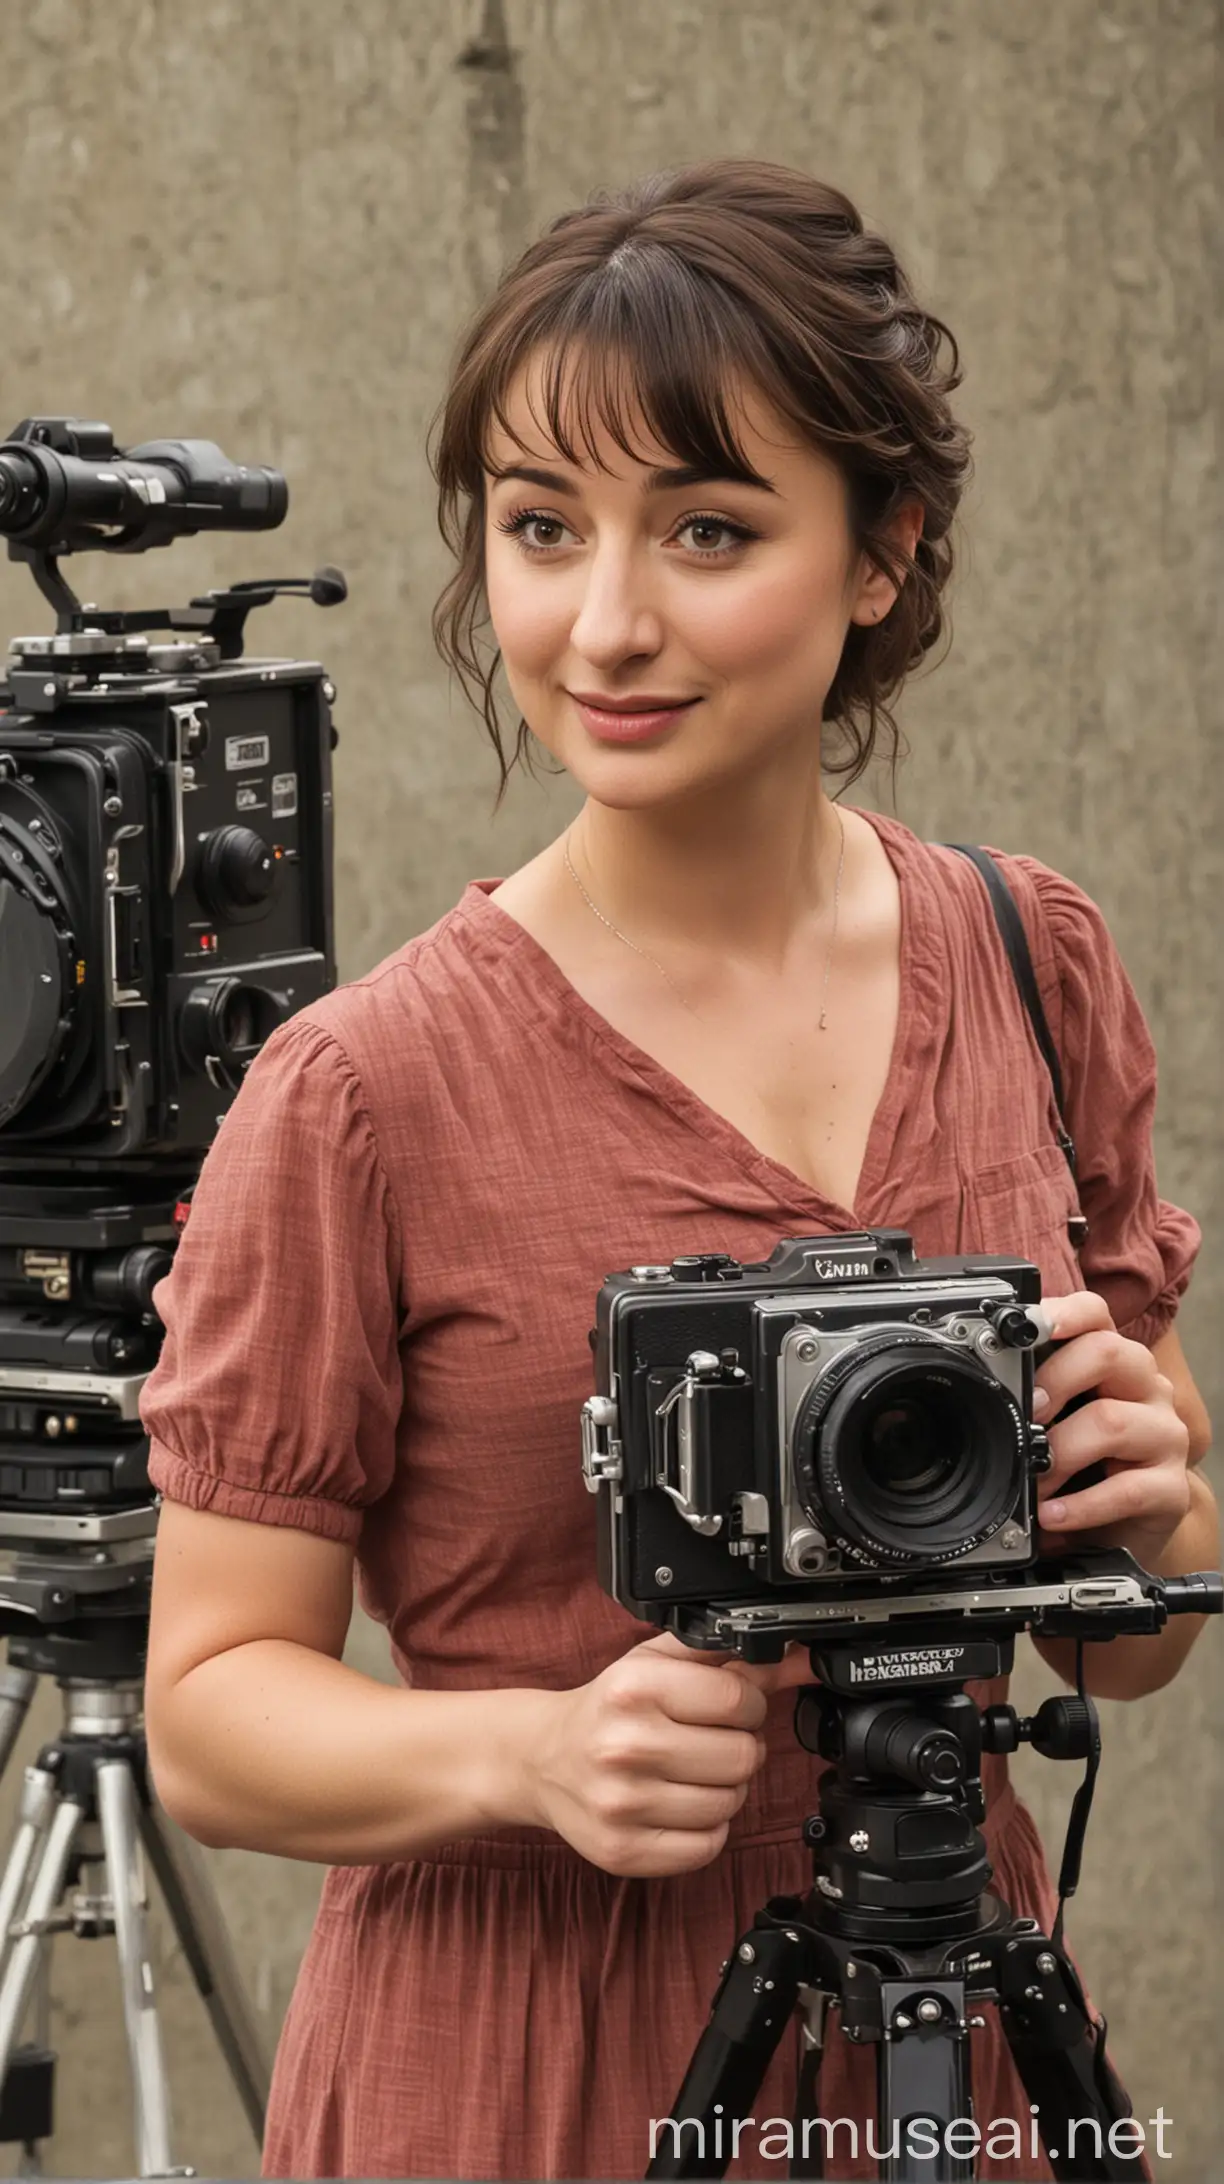 Actress Milana Vayntrub Performing on Movie Set with Camera Director and Producer